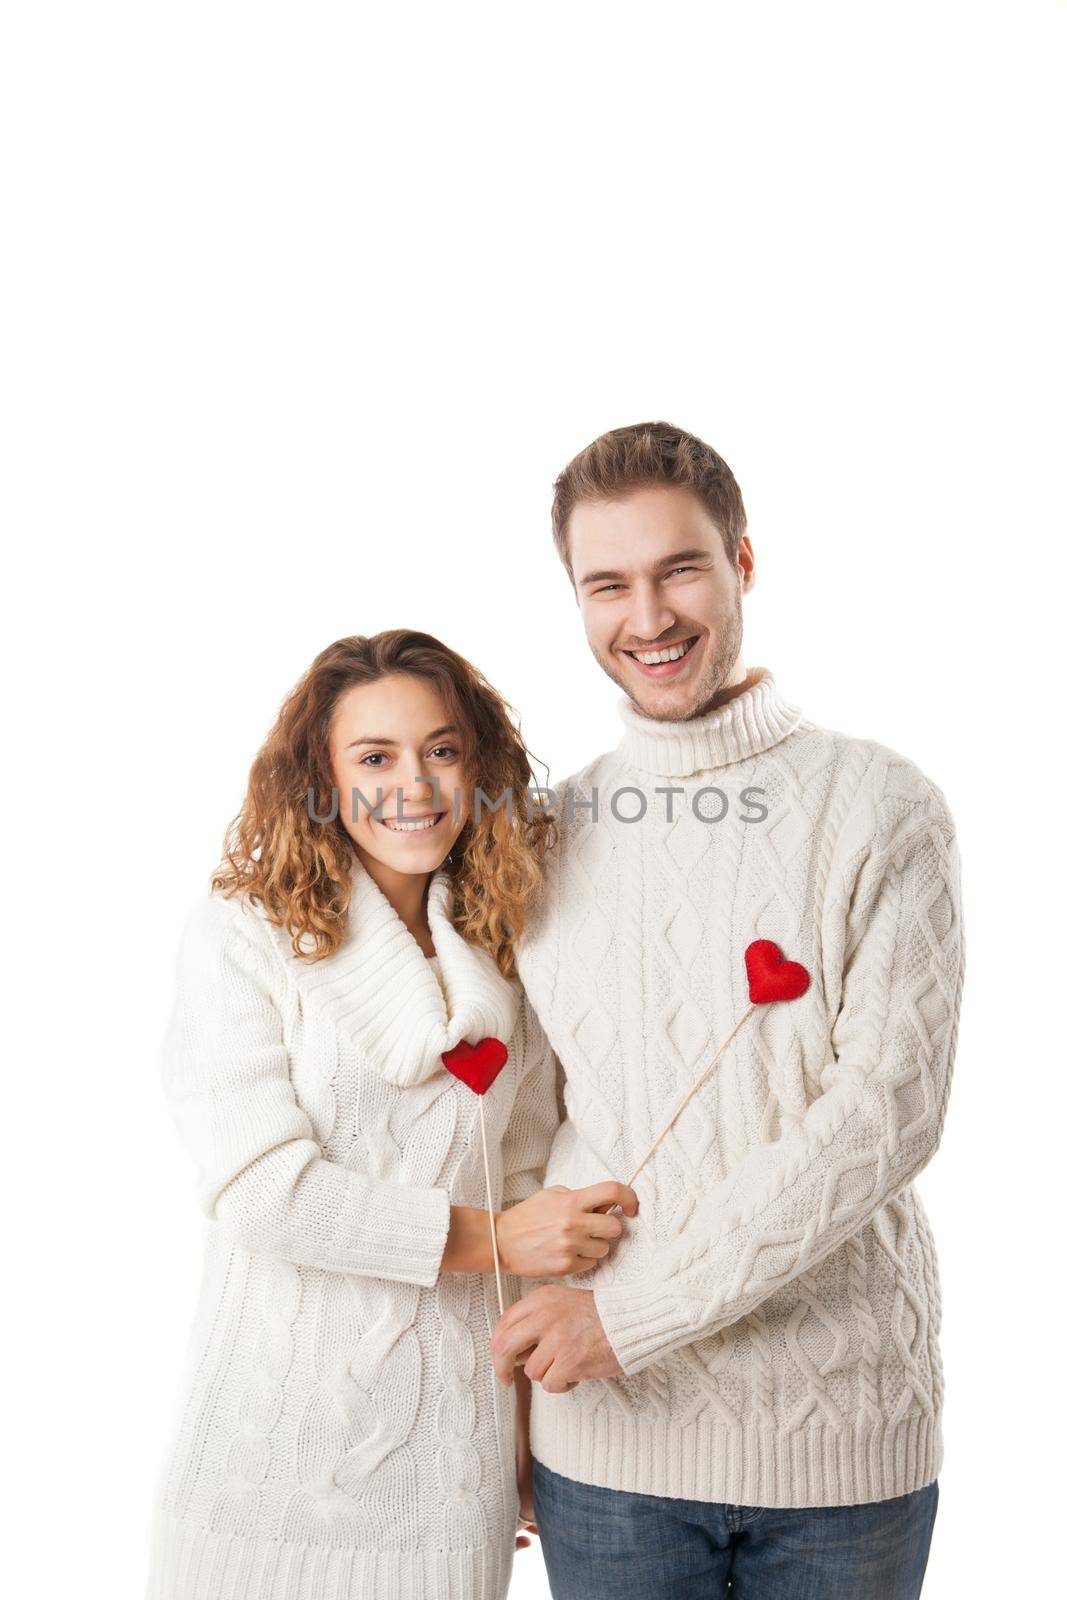 Joyful couple holding red hearts and laughing by Julenochek